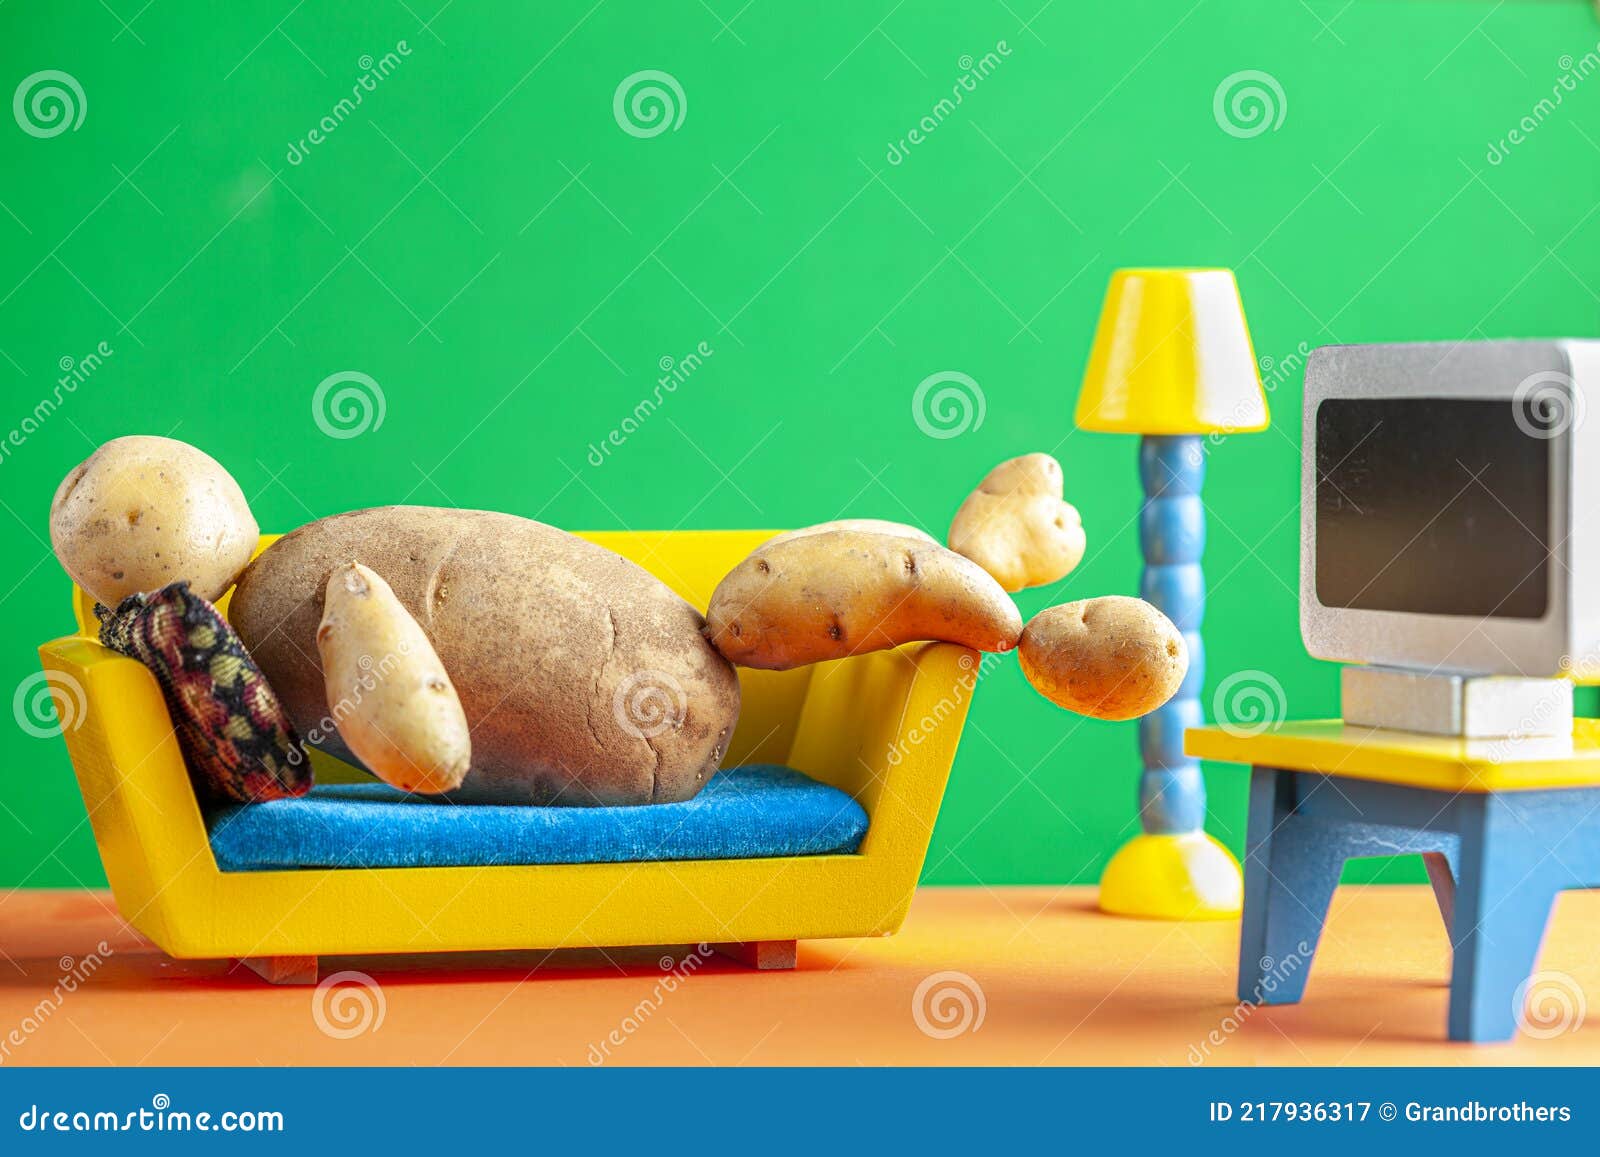 a quirky metaphorical concept image showing a potato man lying on a couch in a living room setting